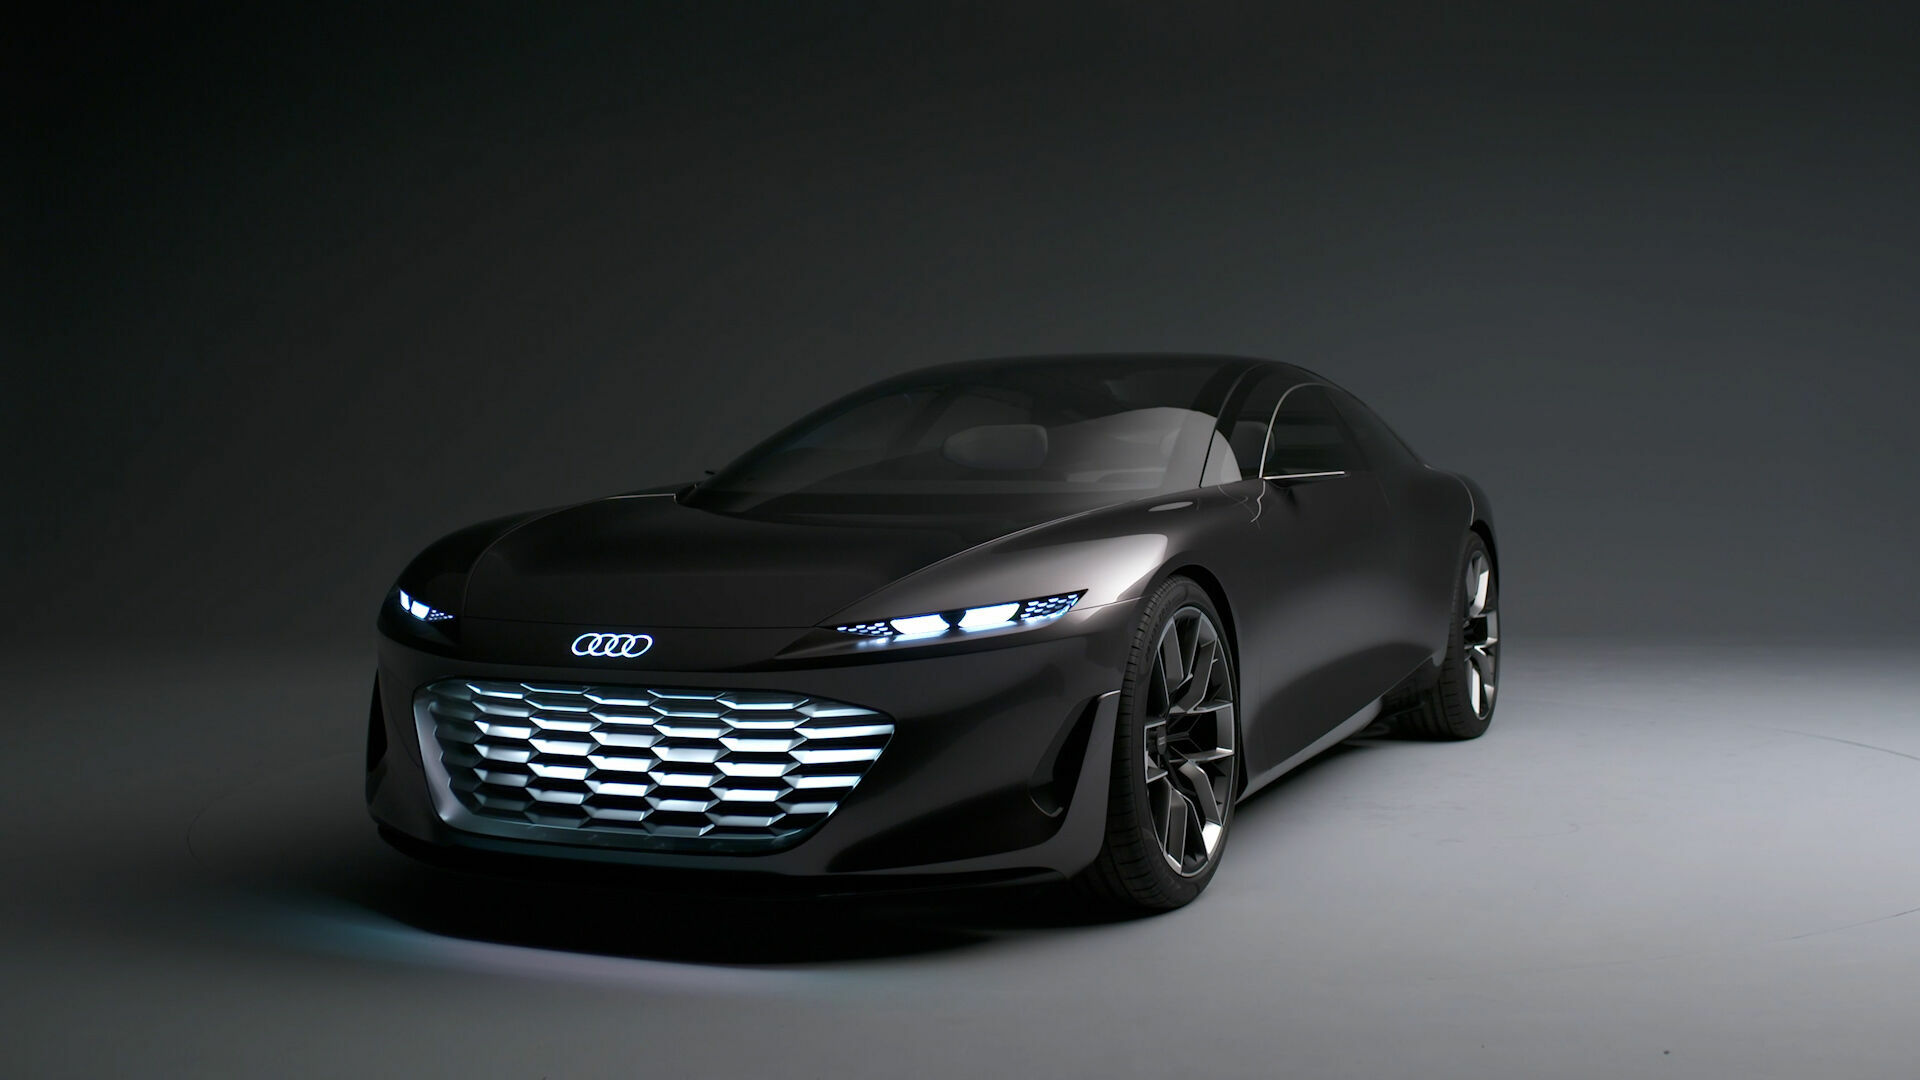 The reveal of the Audi grandsphere concept